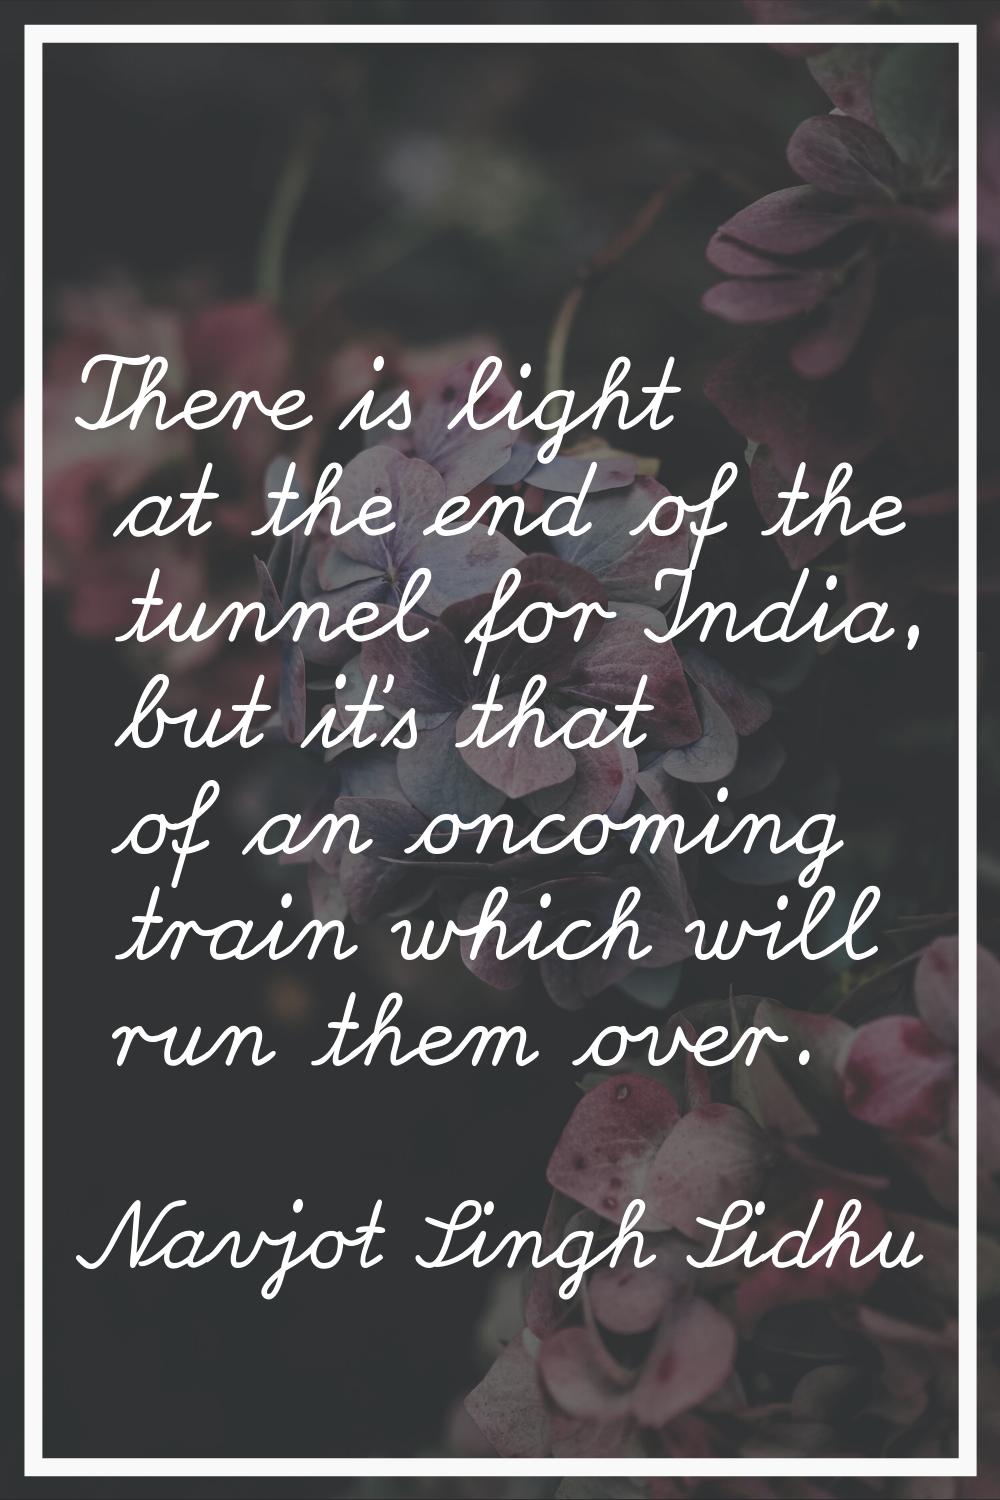 There is light at the end of the tunnel for India, but it's that of an oncoming train which will ru